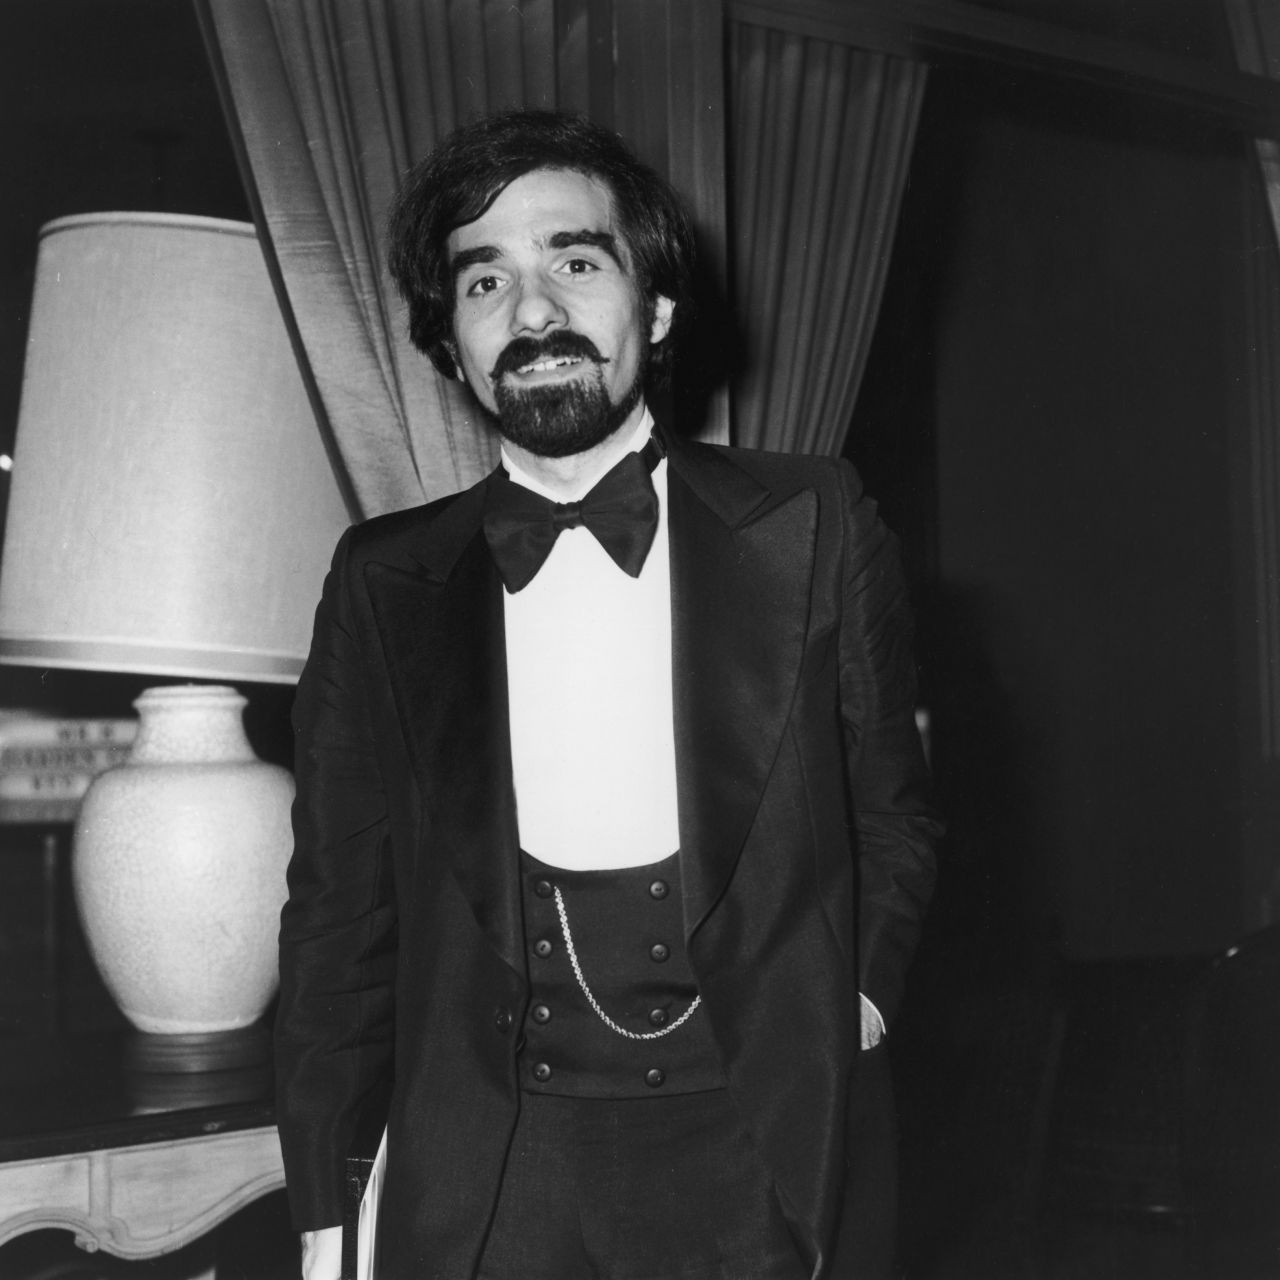 Martin Scorsese at the Directors Guild of America annual awards dinner in Beverly Hills, 1977